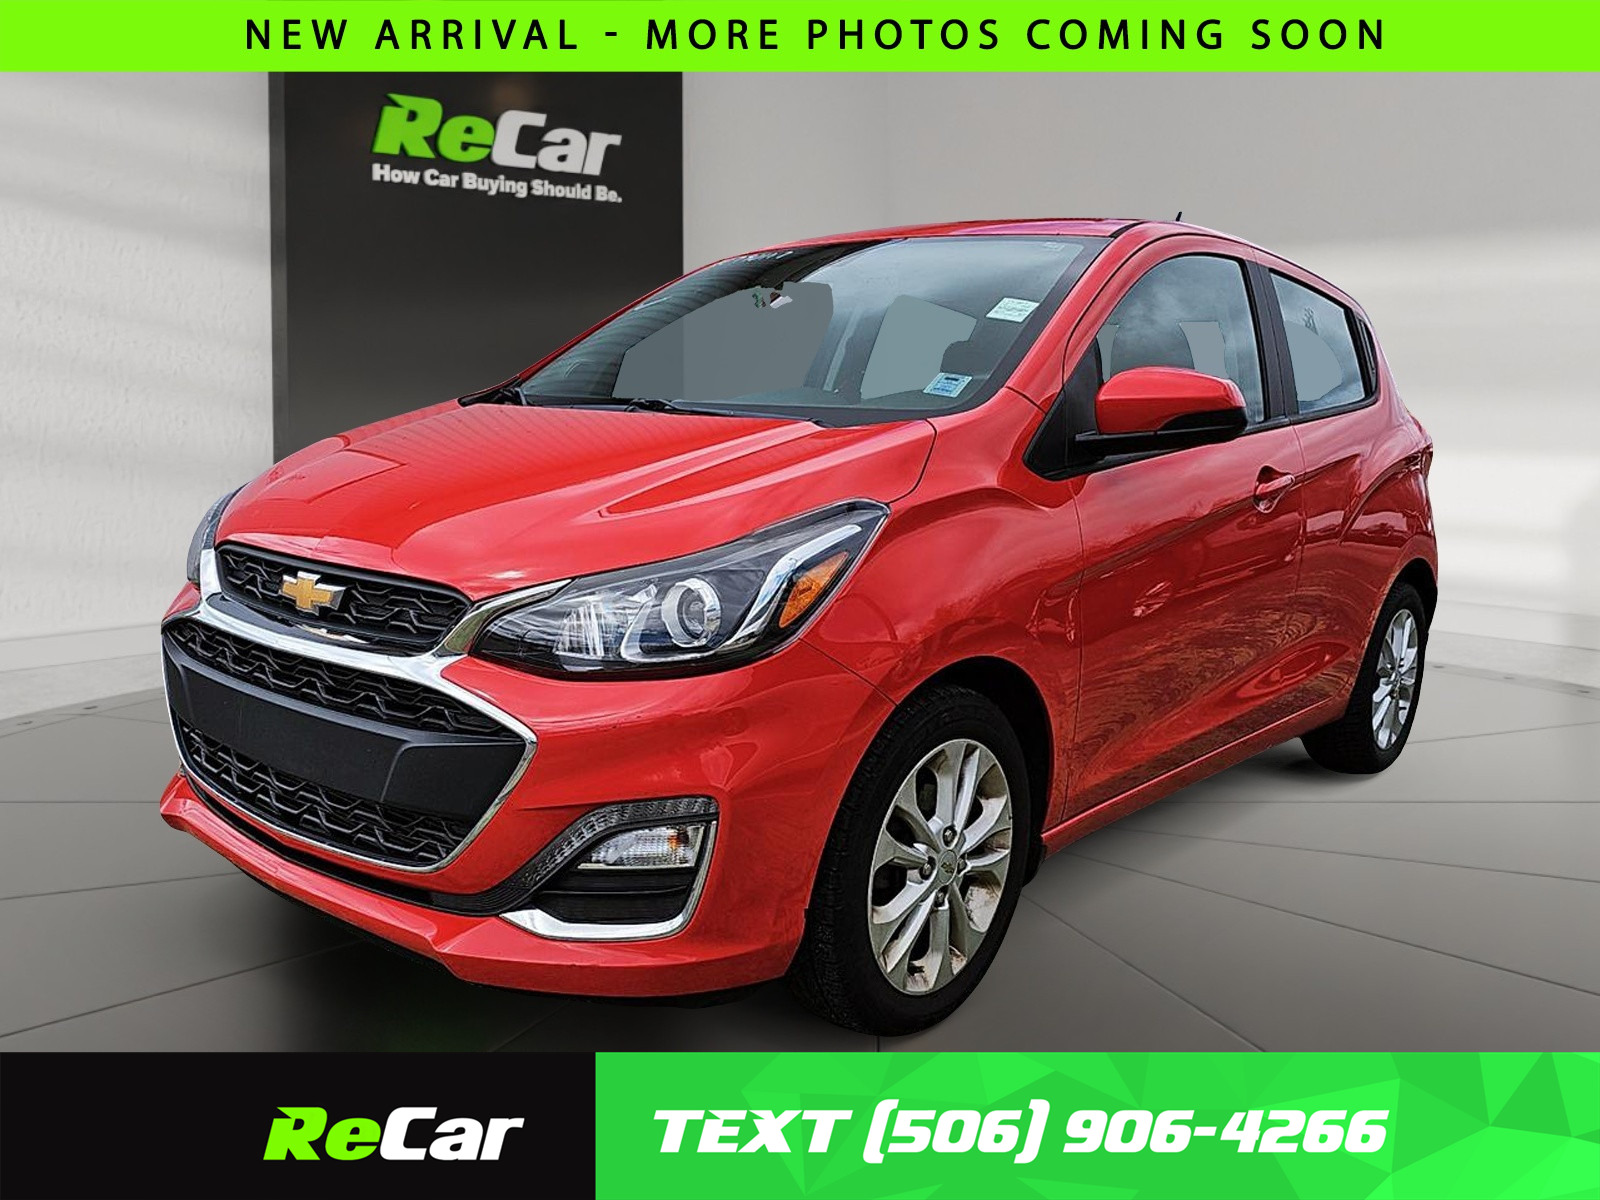 2019 Chevrolet Spark Cruise Control | Air Conditioning | Apple CarPlay